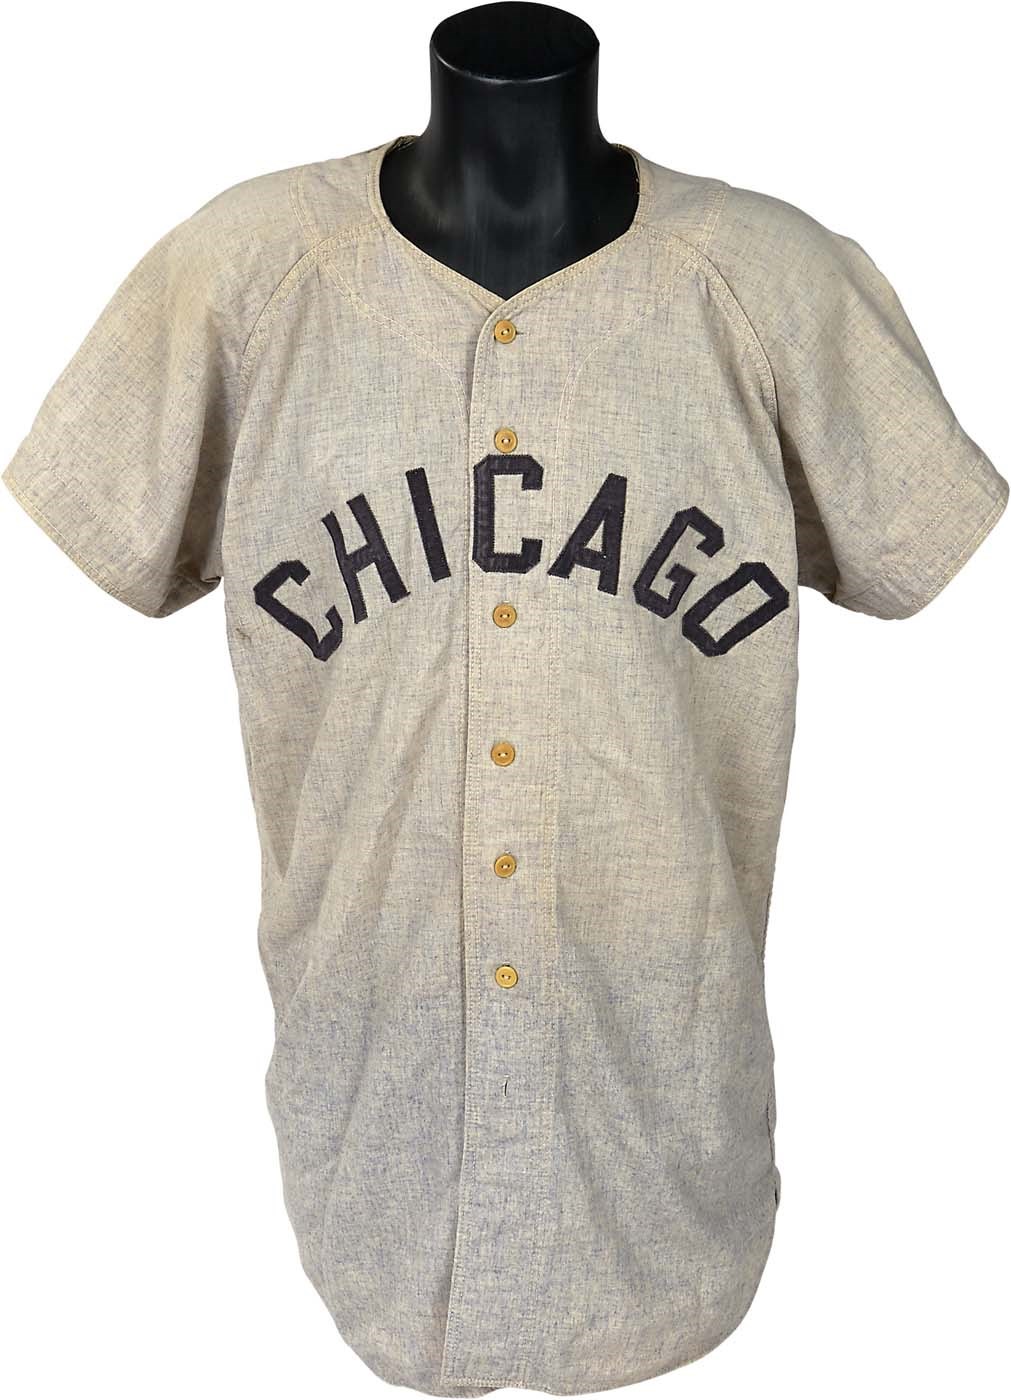 Baseball Equipment - 1957 Chicago White Sox #21 Jerry Staley Game Worn Jersey